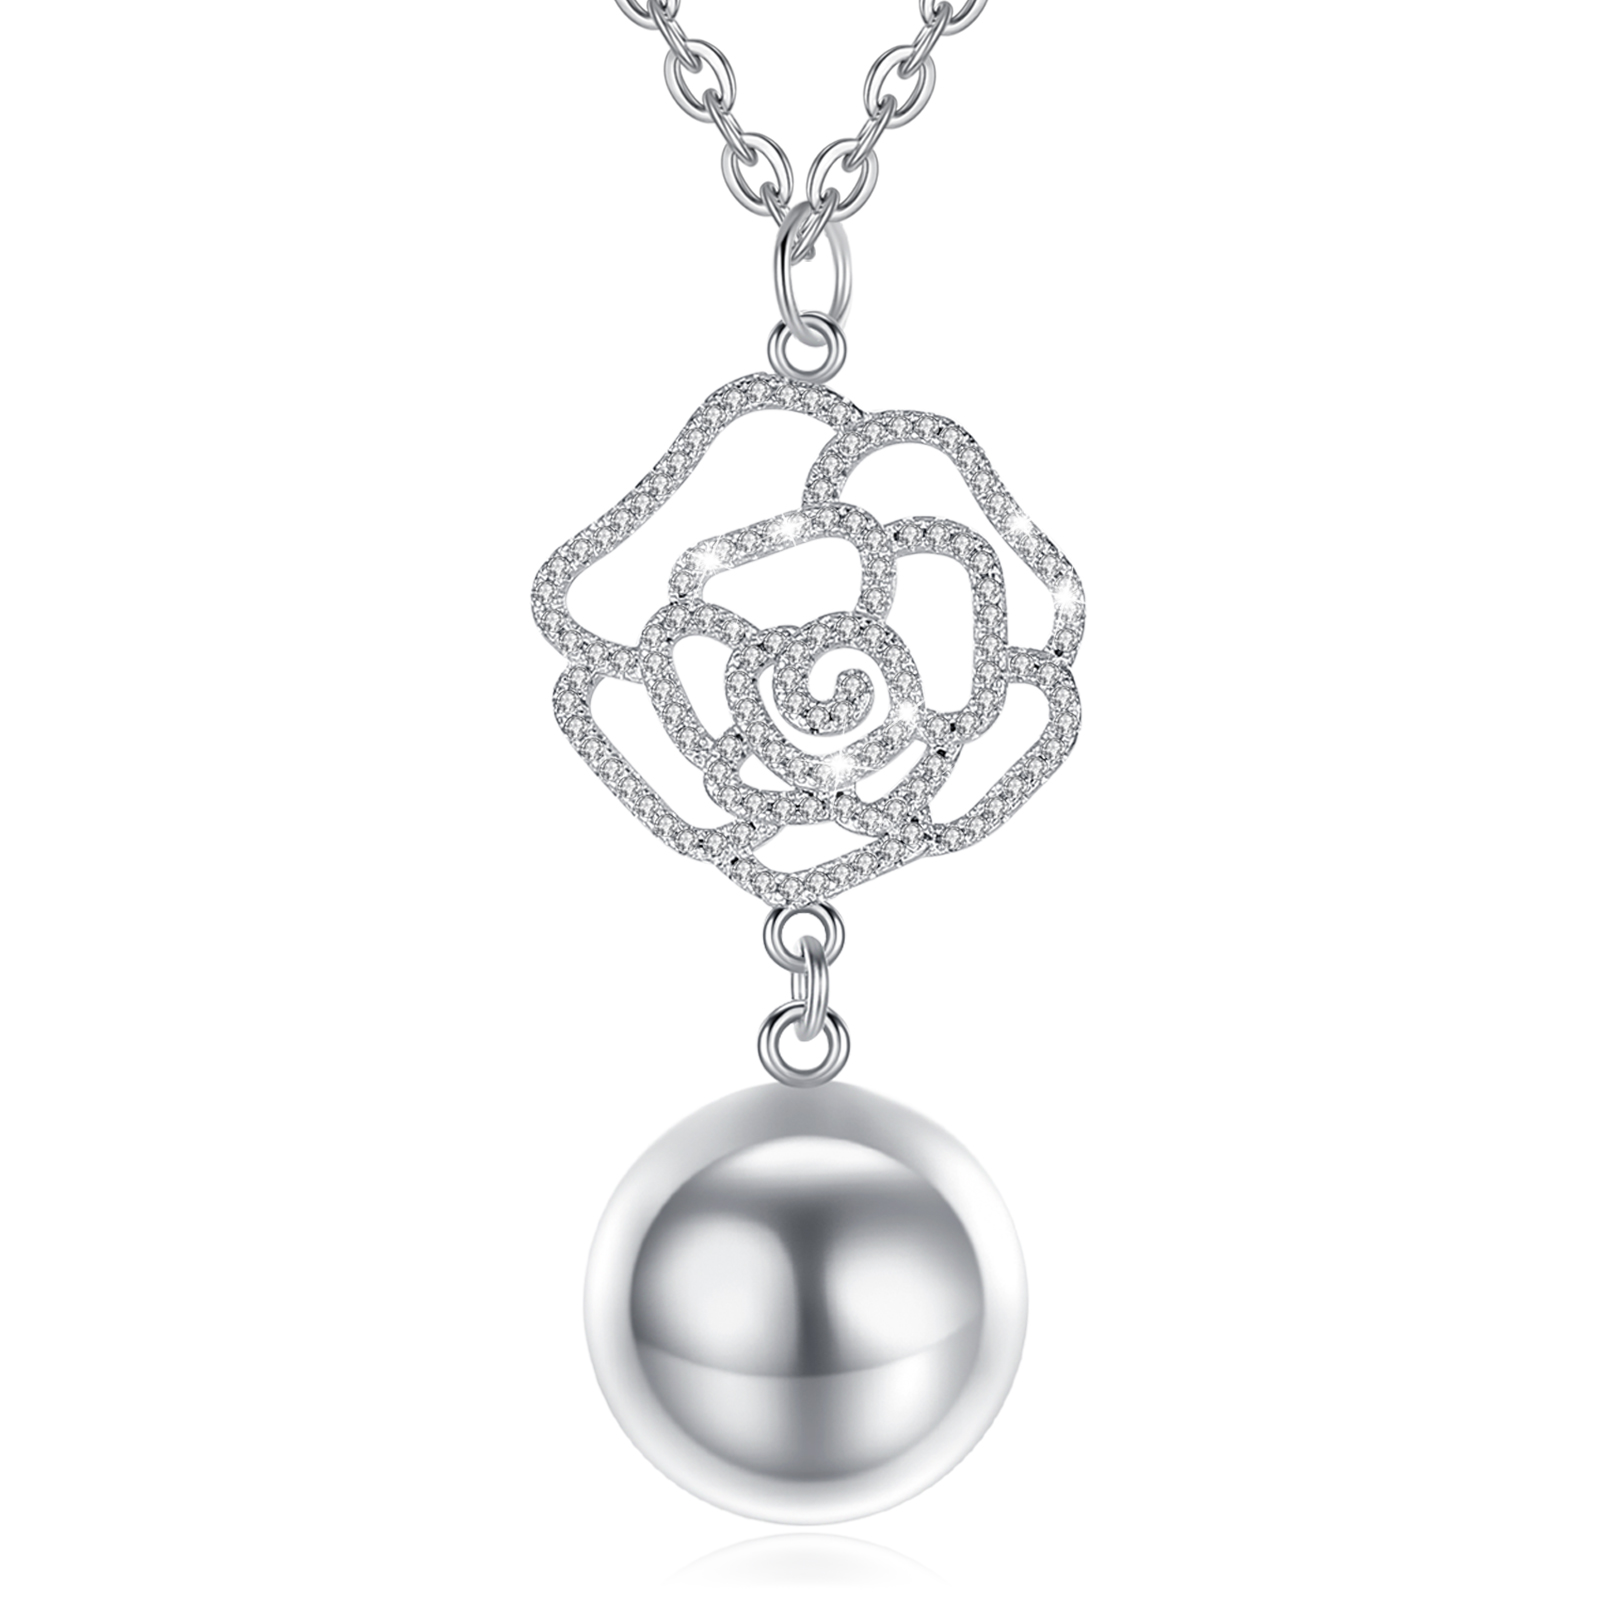 Merryshine Jewelry Rose Flower Charm Mexican Bola Harmony Ball Necklace